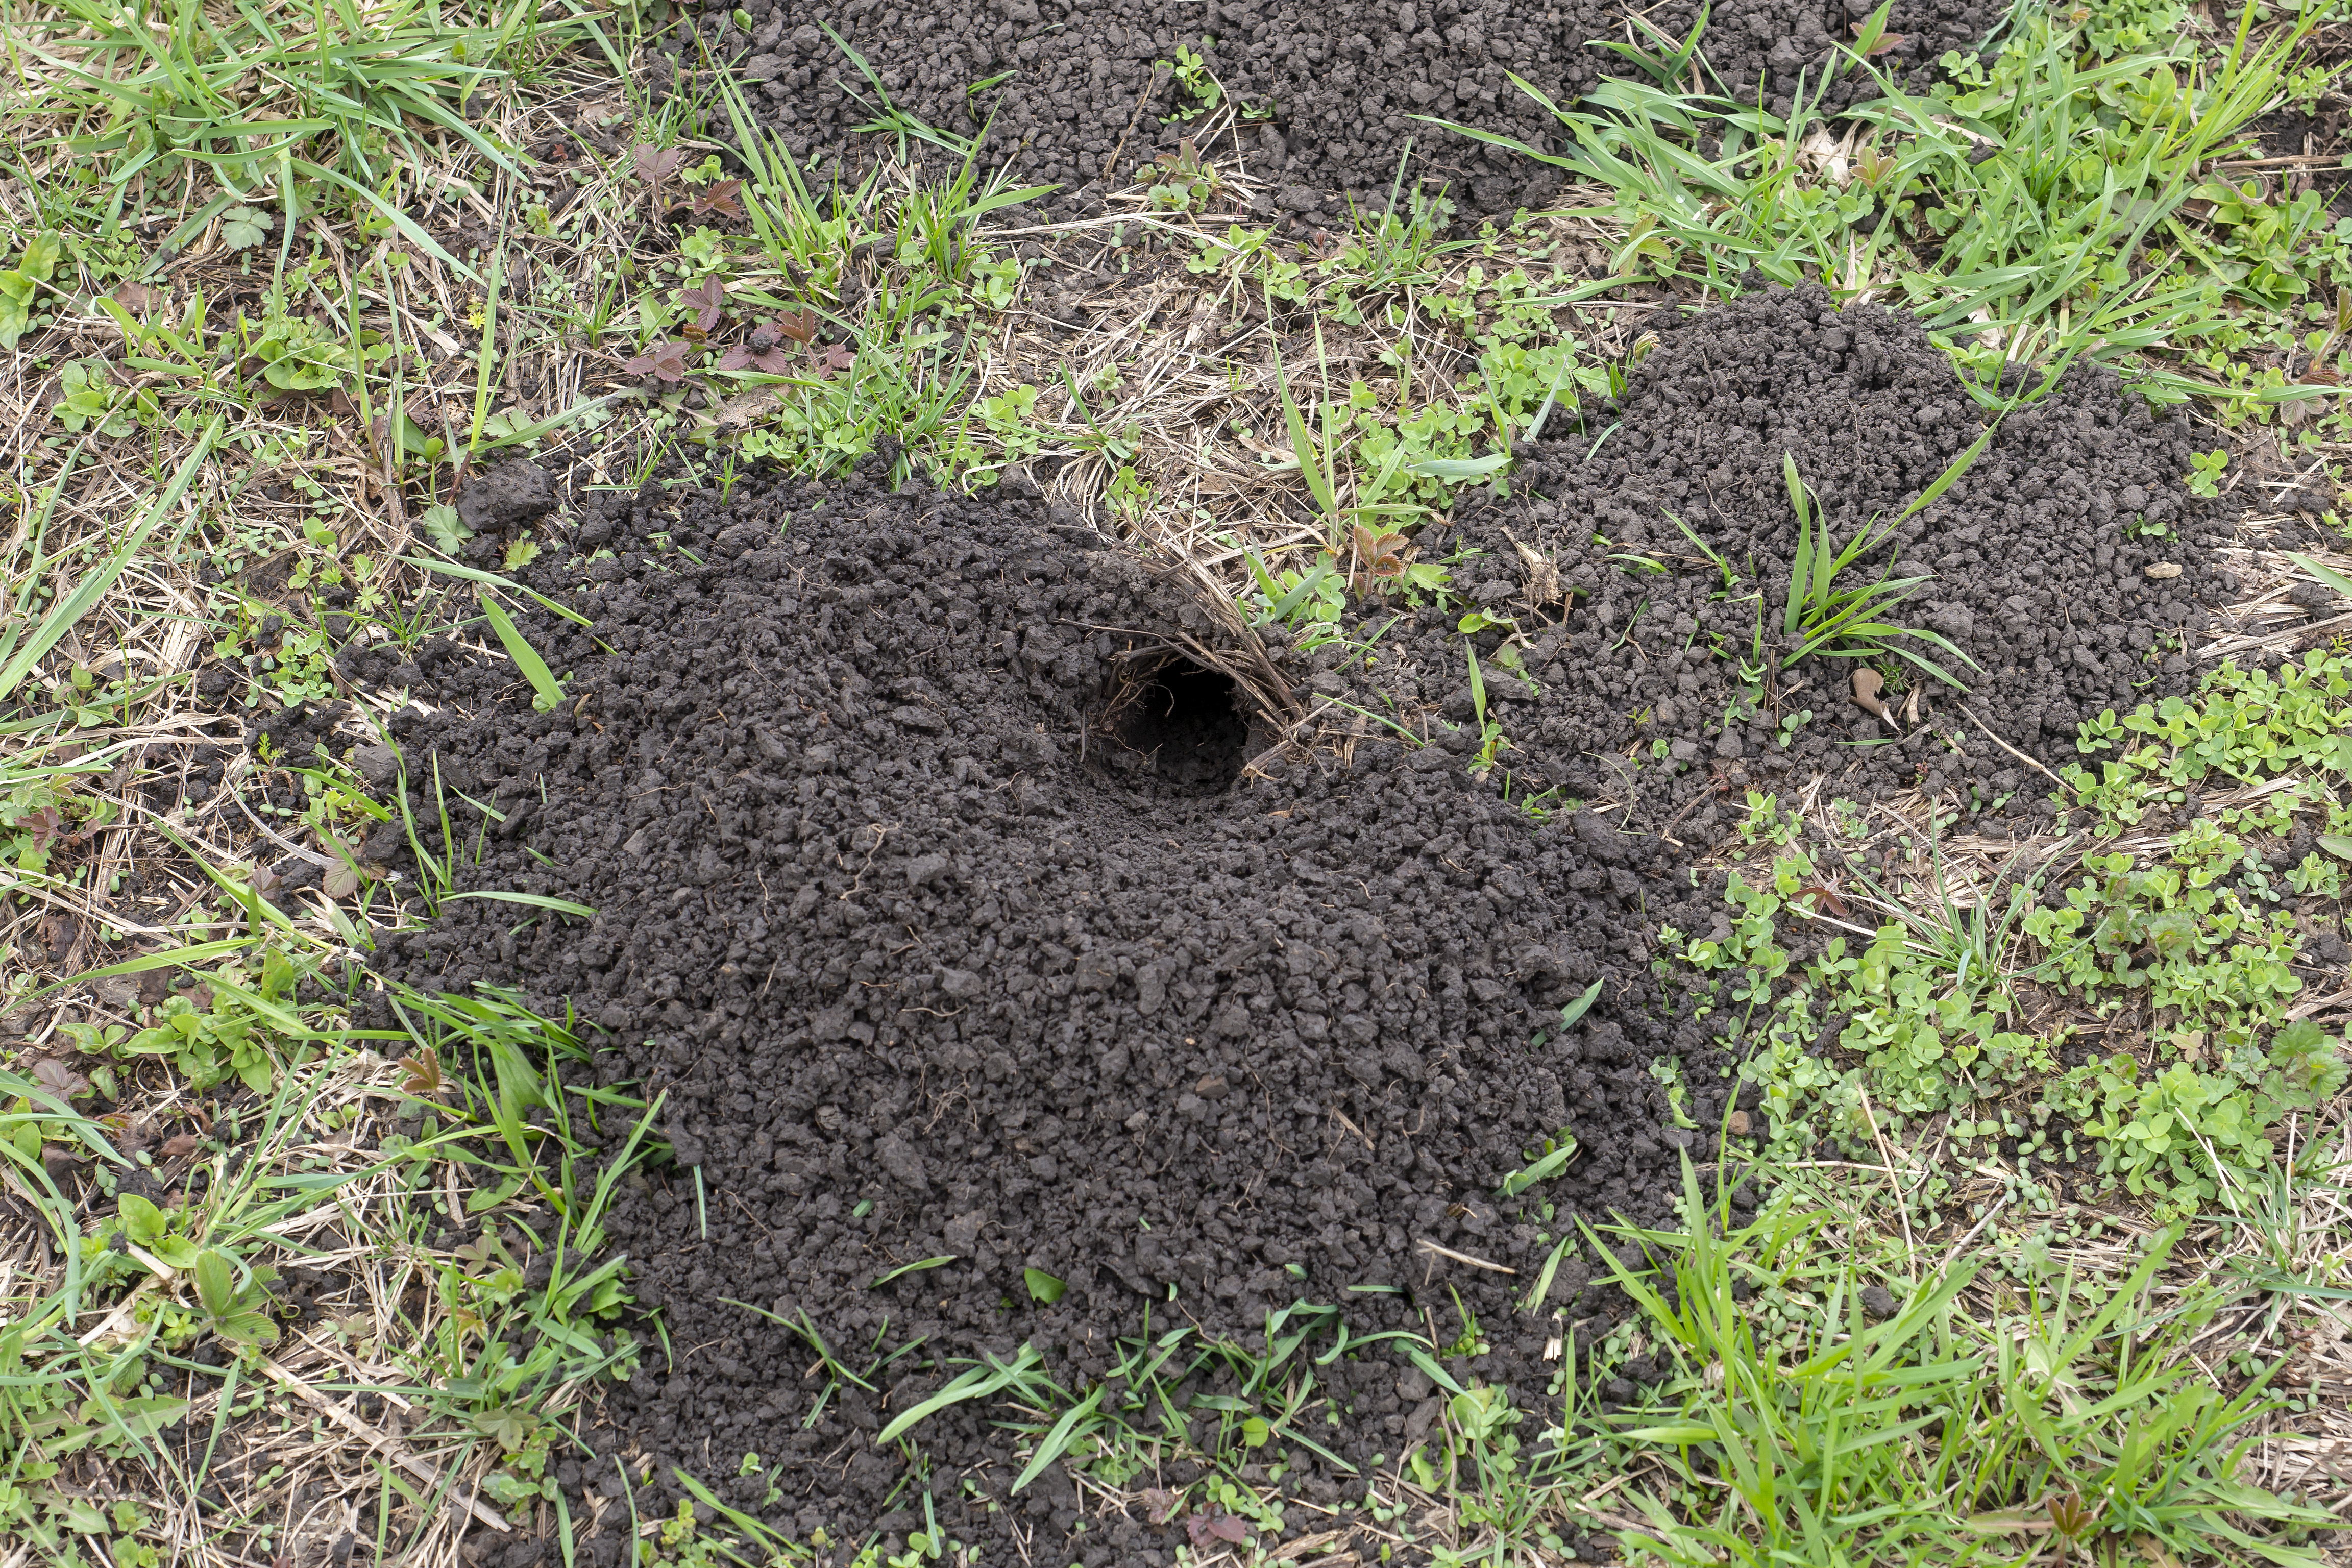 How to Tell a Mole Hole From a Chipmunk Hole | Hunker